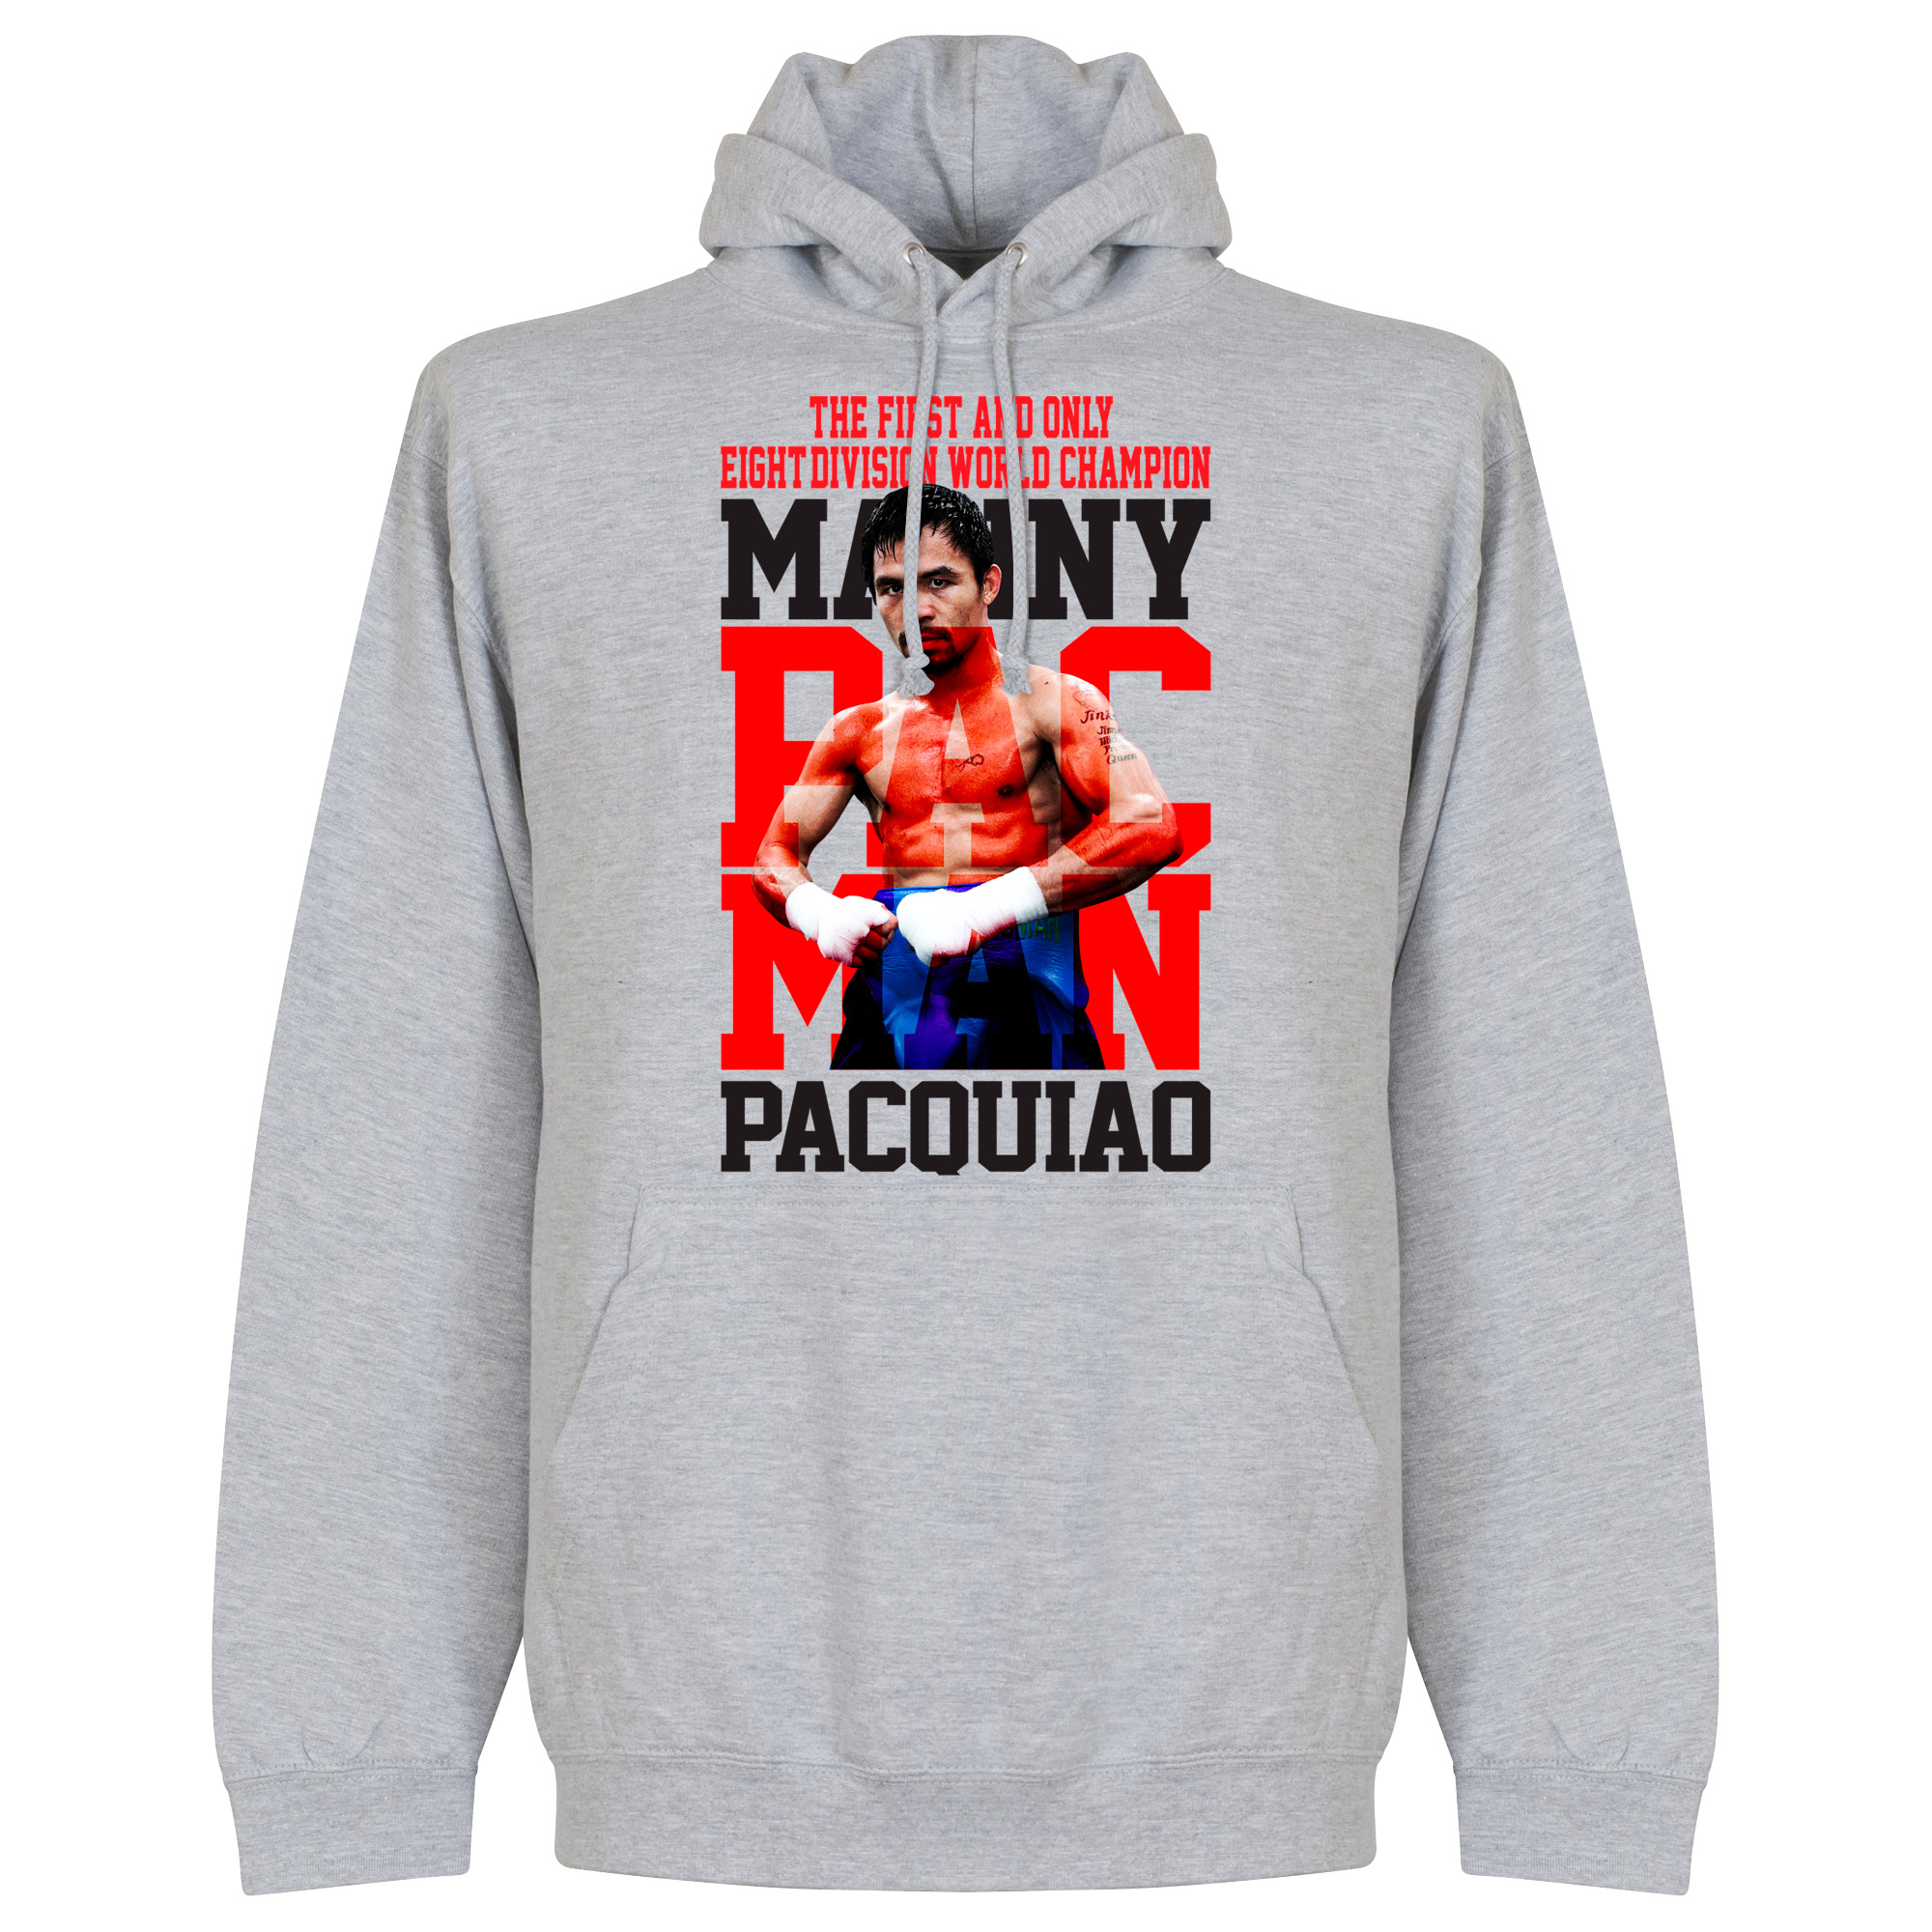 Manny Pacquiao Legend Hooded Sweater